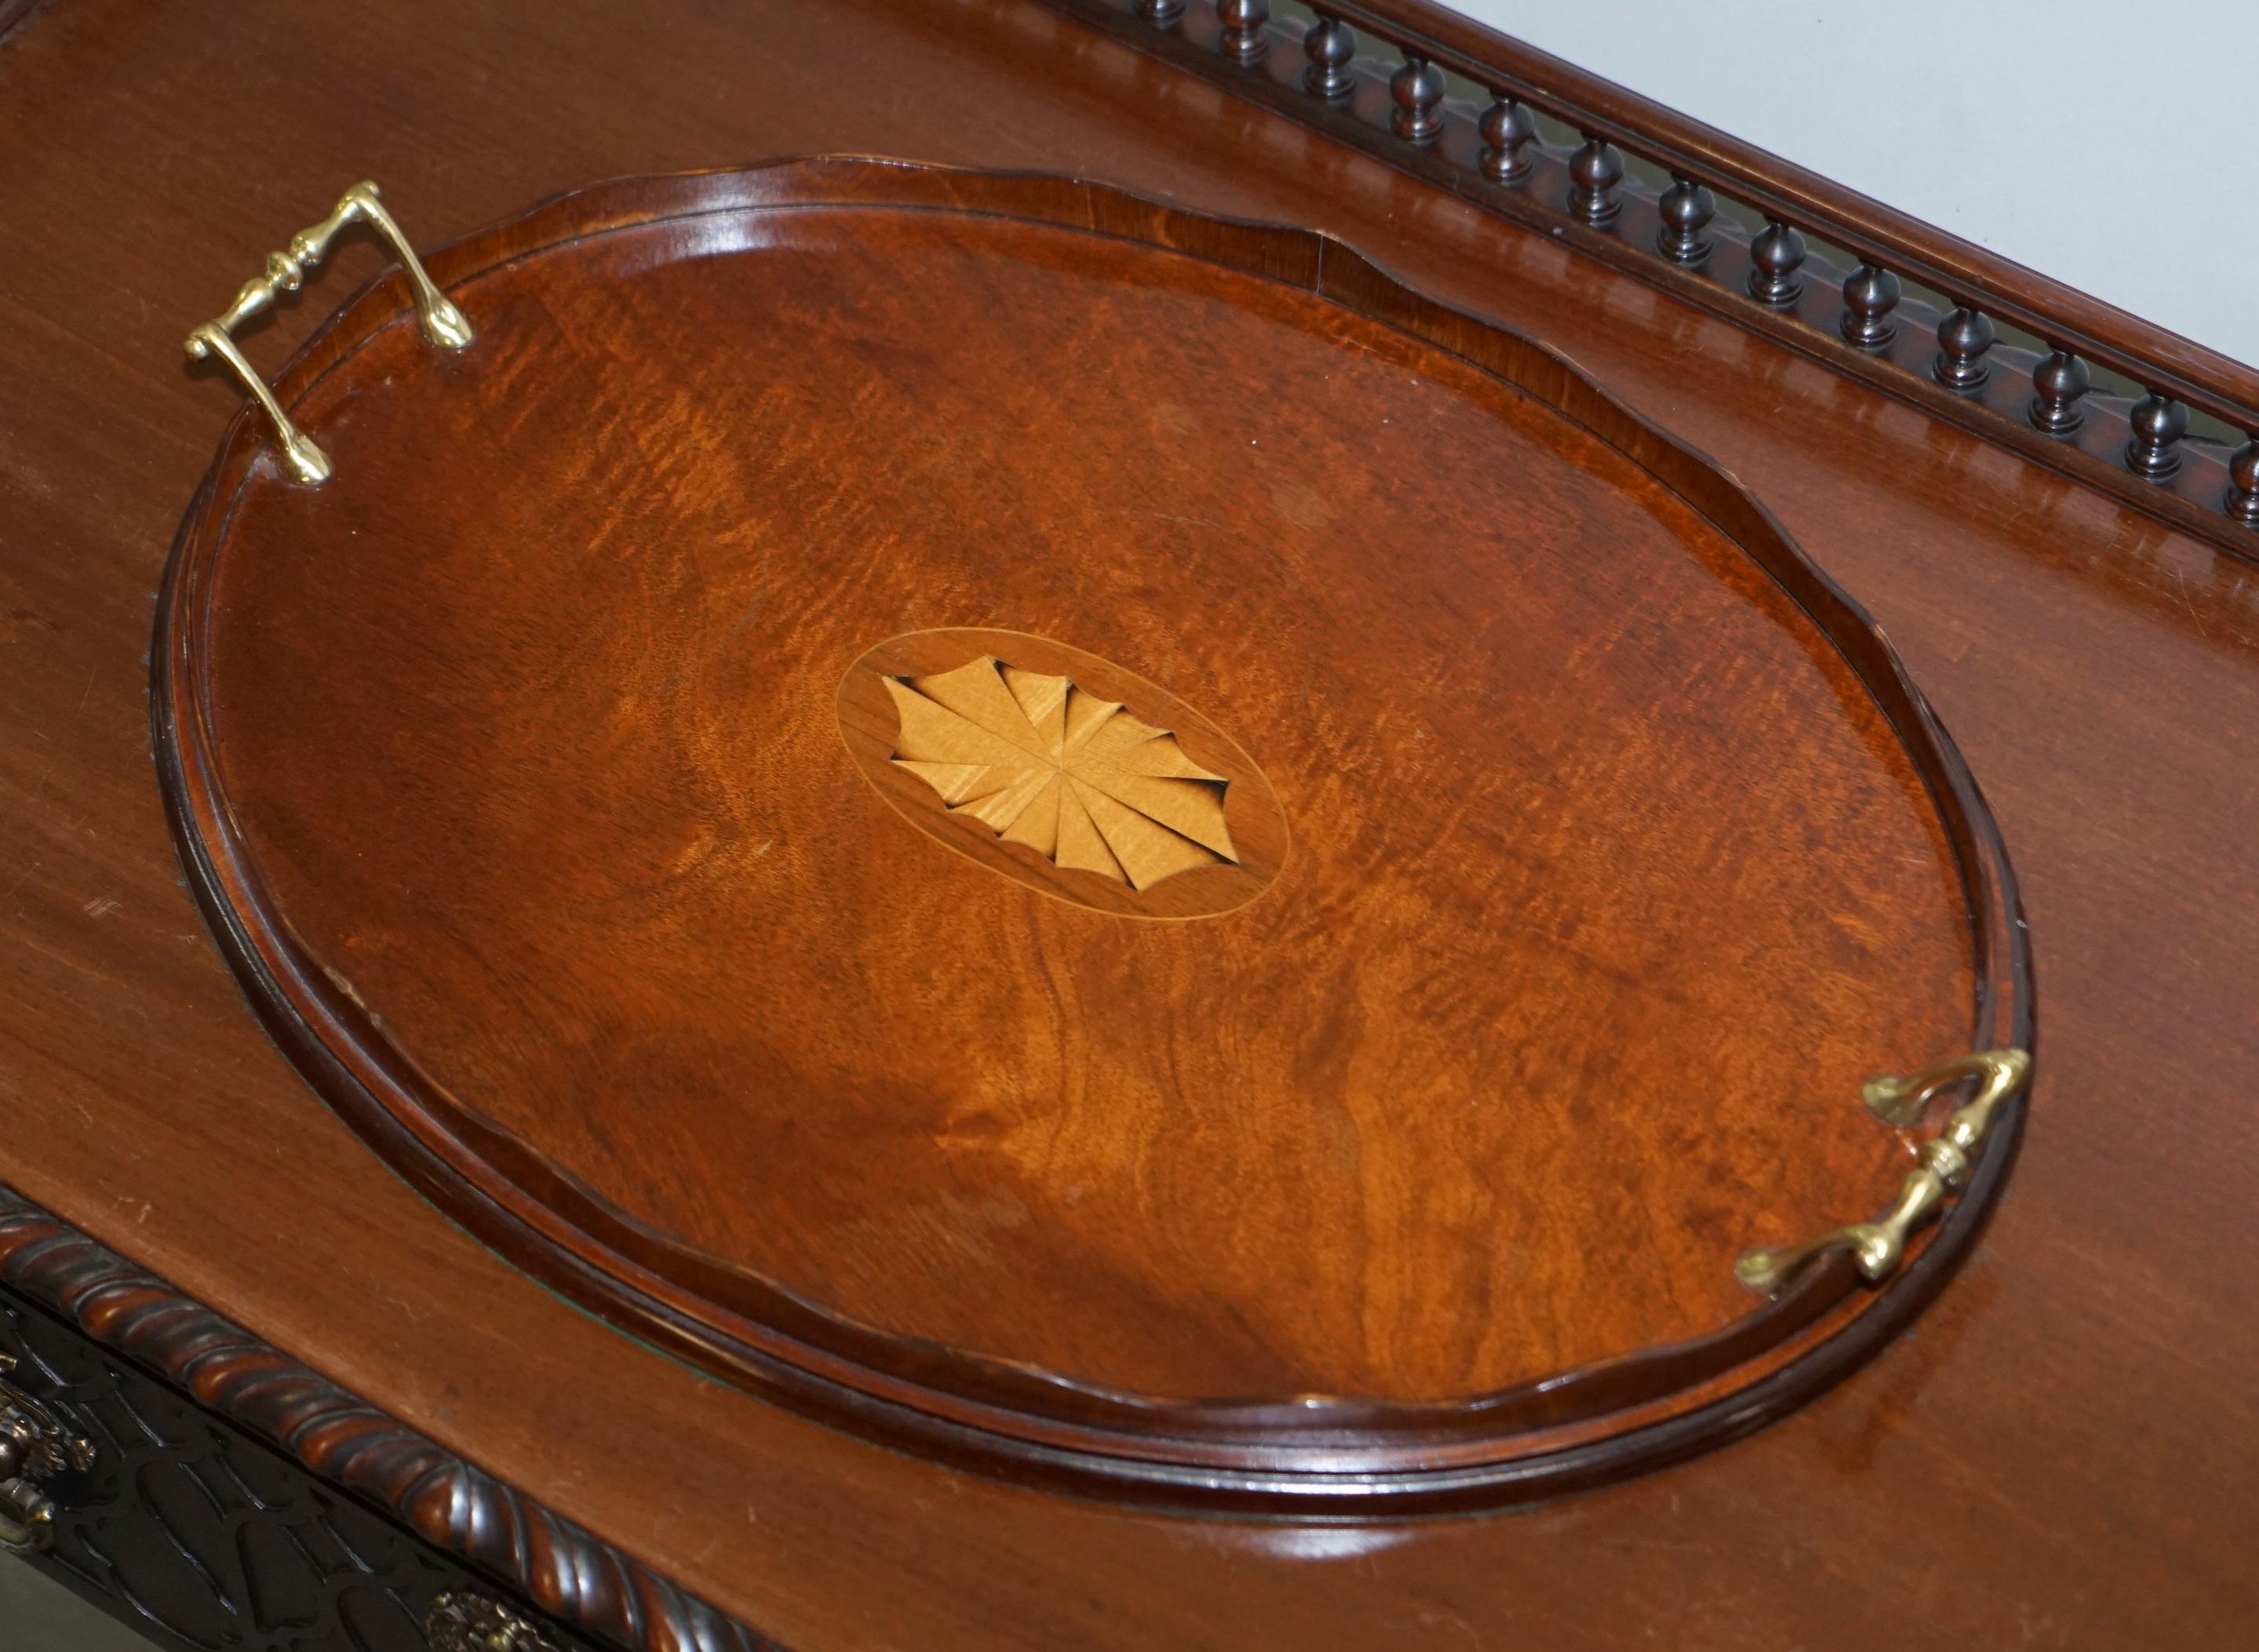 We are delighted to offer for sale this exquisite very well made original Victorian walnut Sheraton inlaid large butlers serving tray with bronze handles

This is a well made and decorative piece, it’s a large tray so you can easily fit a dinner